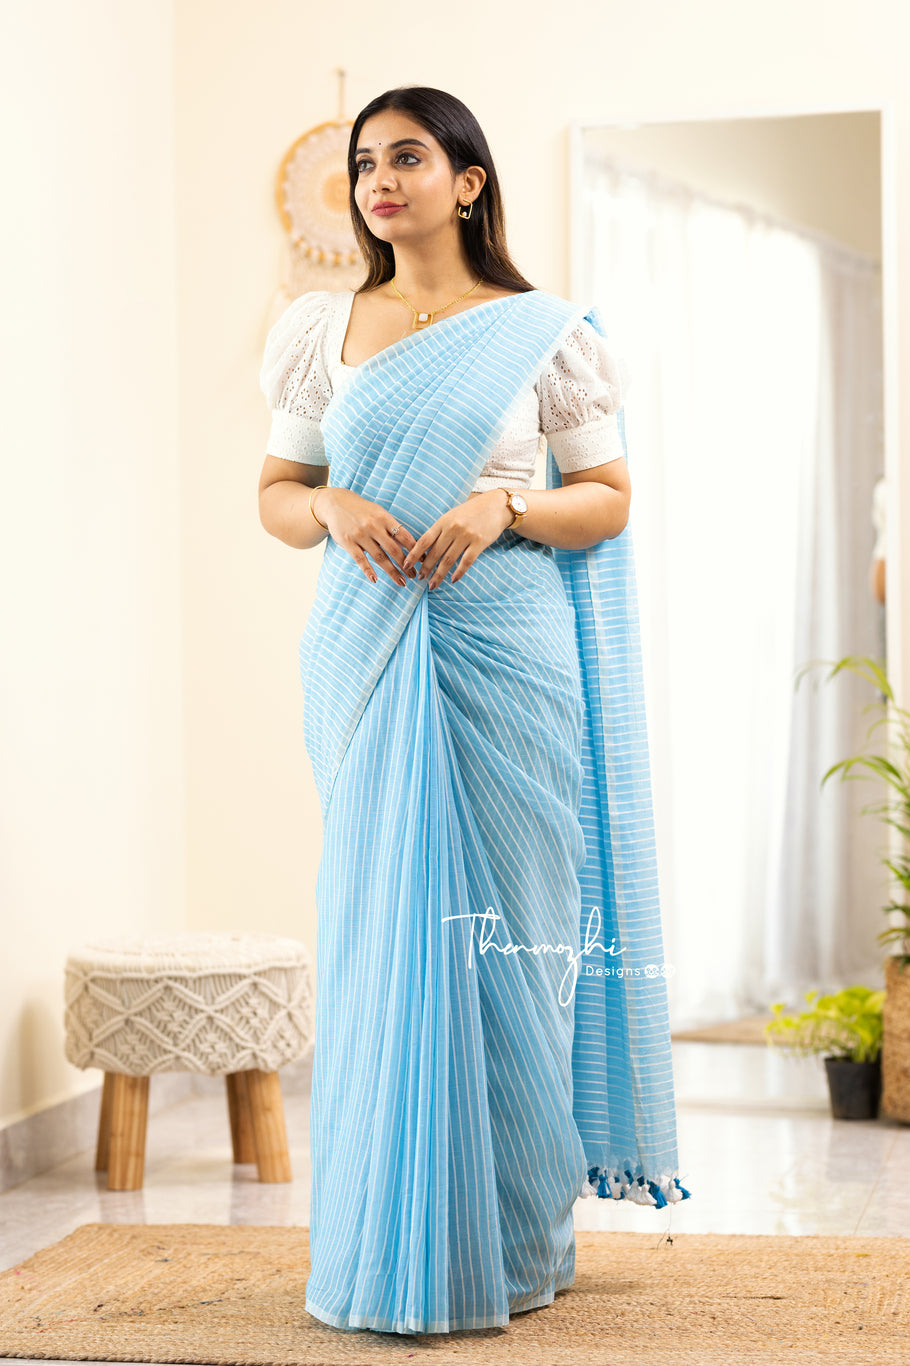 Exquisite Collection Of Cotton Saree For Office Wear